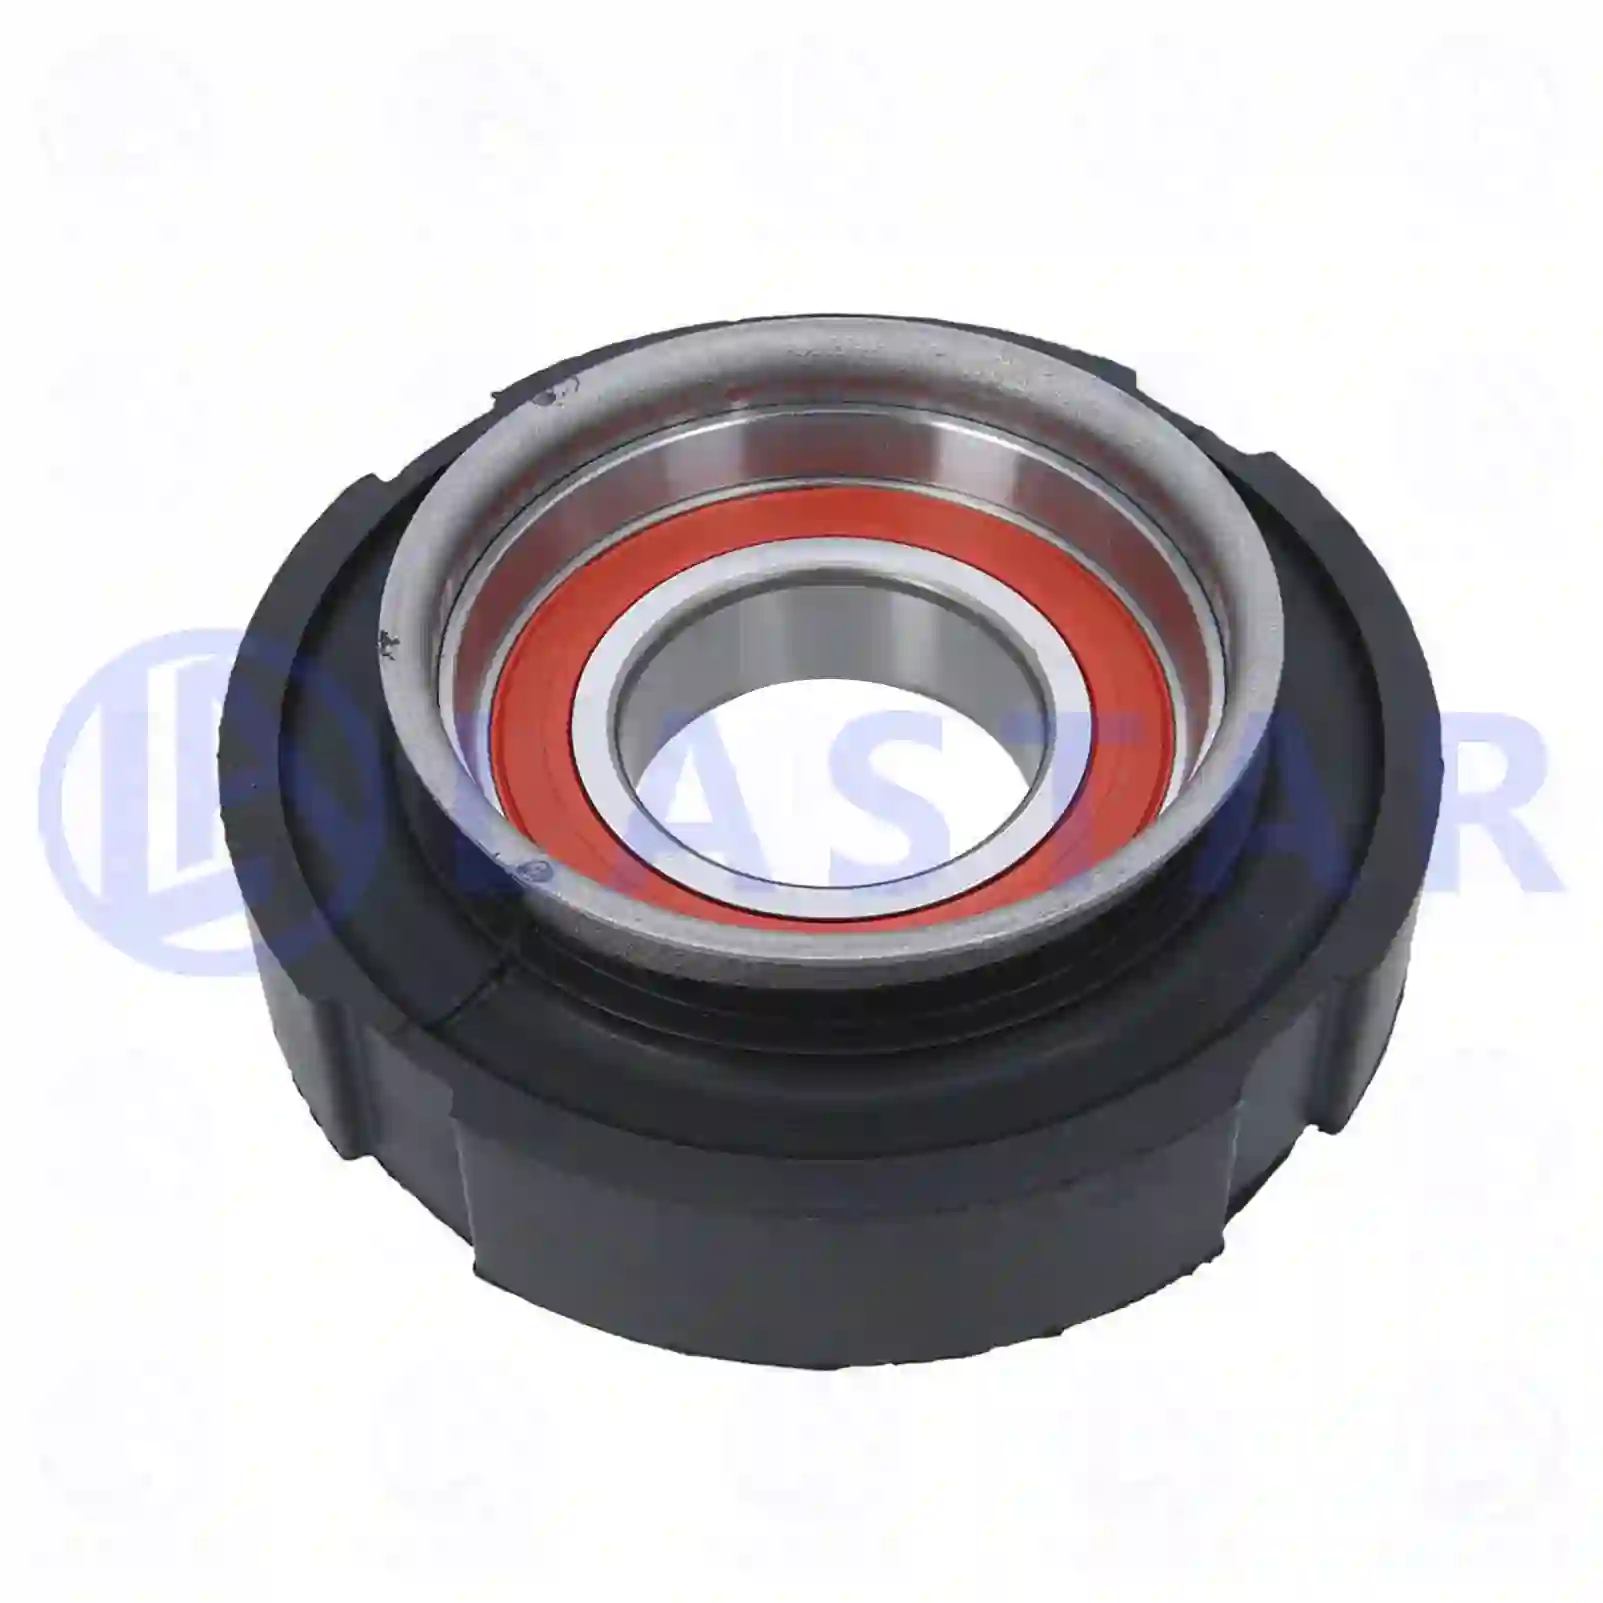 Support Bearing Center bearing, complete, la no: 77734411 ,  oem no:1387764, 2559861, ZG02512-0008 Lastar Spare Part | Truck Spare Parts, Auotomotive Spare Parts